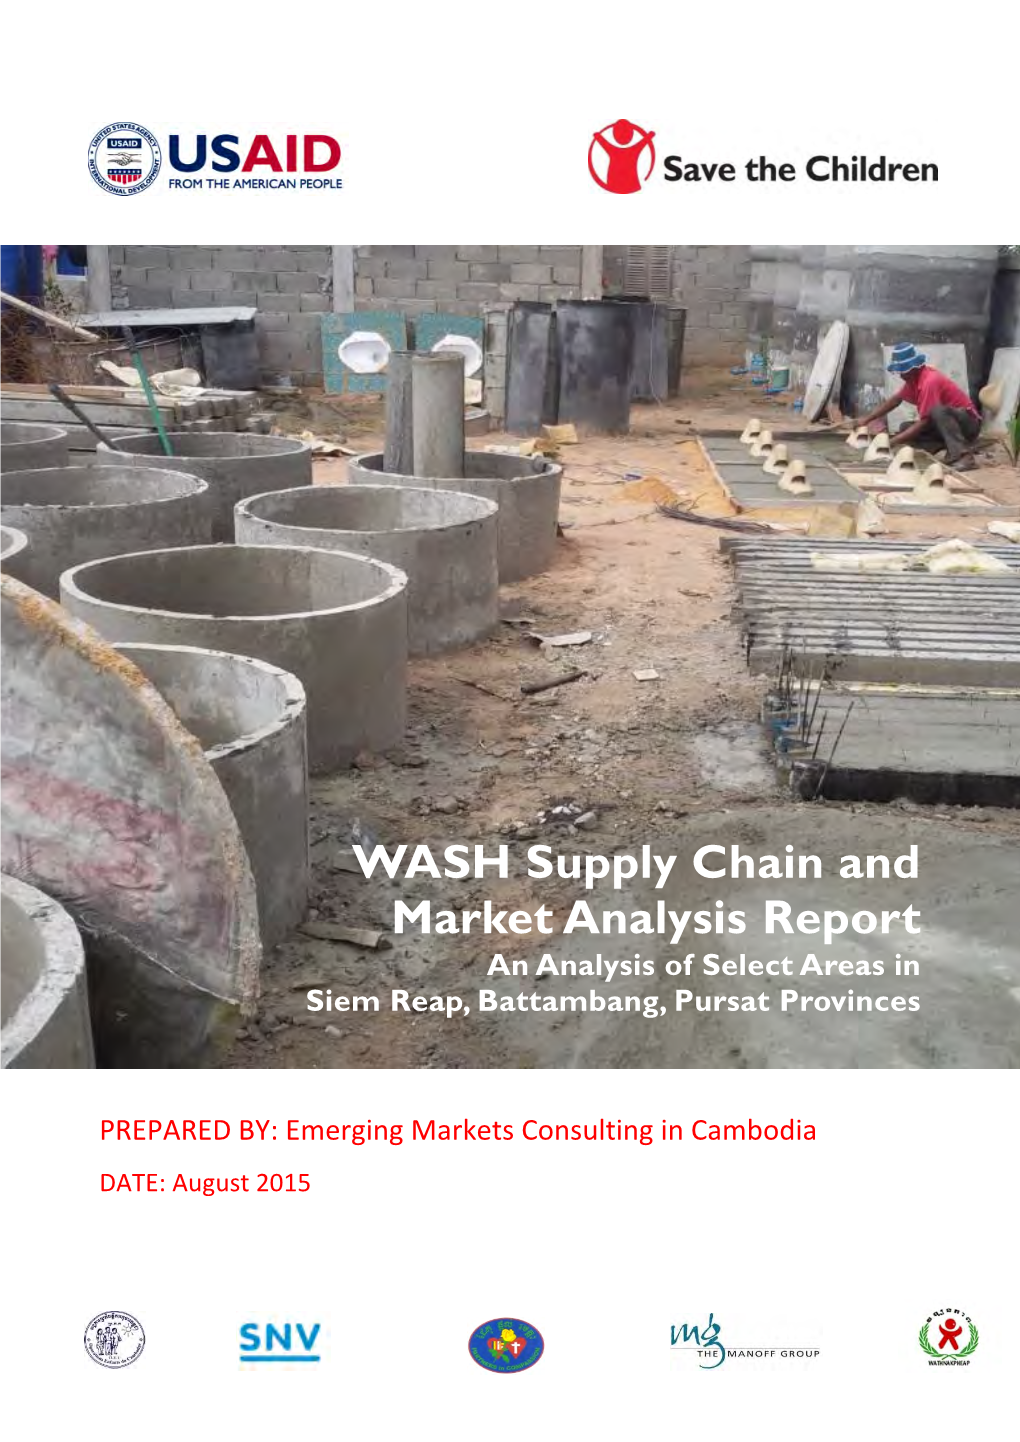 WASH Supply Chain and Market Analysis Report an Analysis of Select Areas in Siem Reap, Battambang, Pursat Provinces